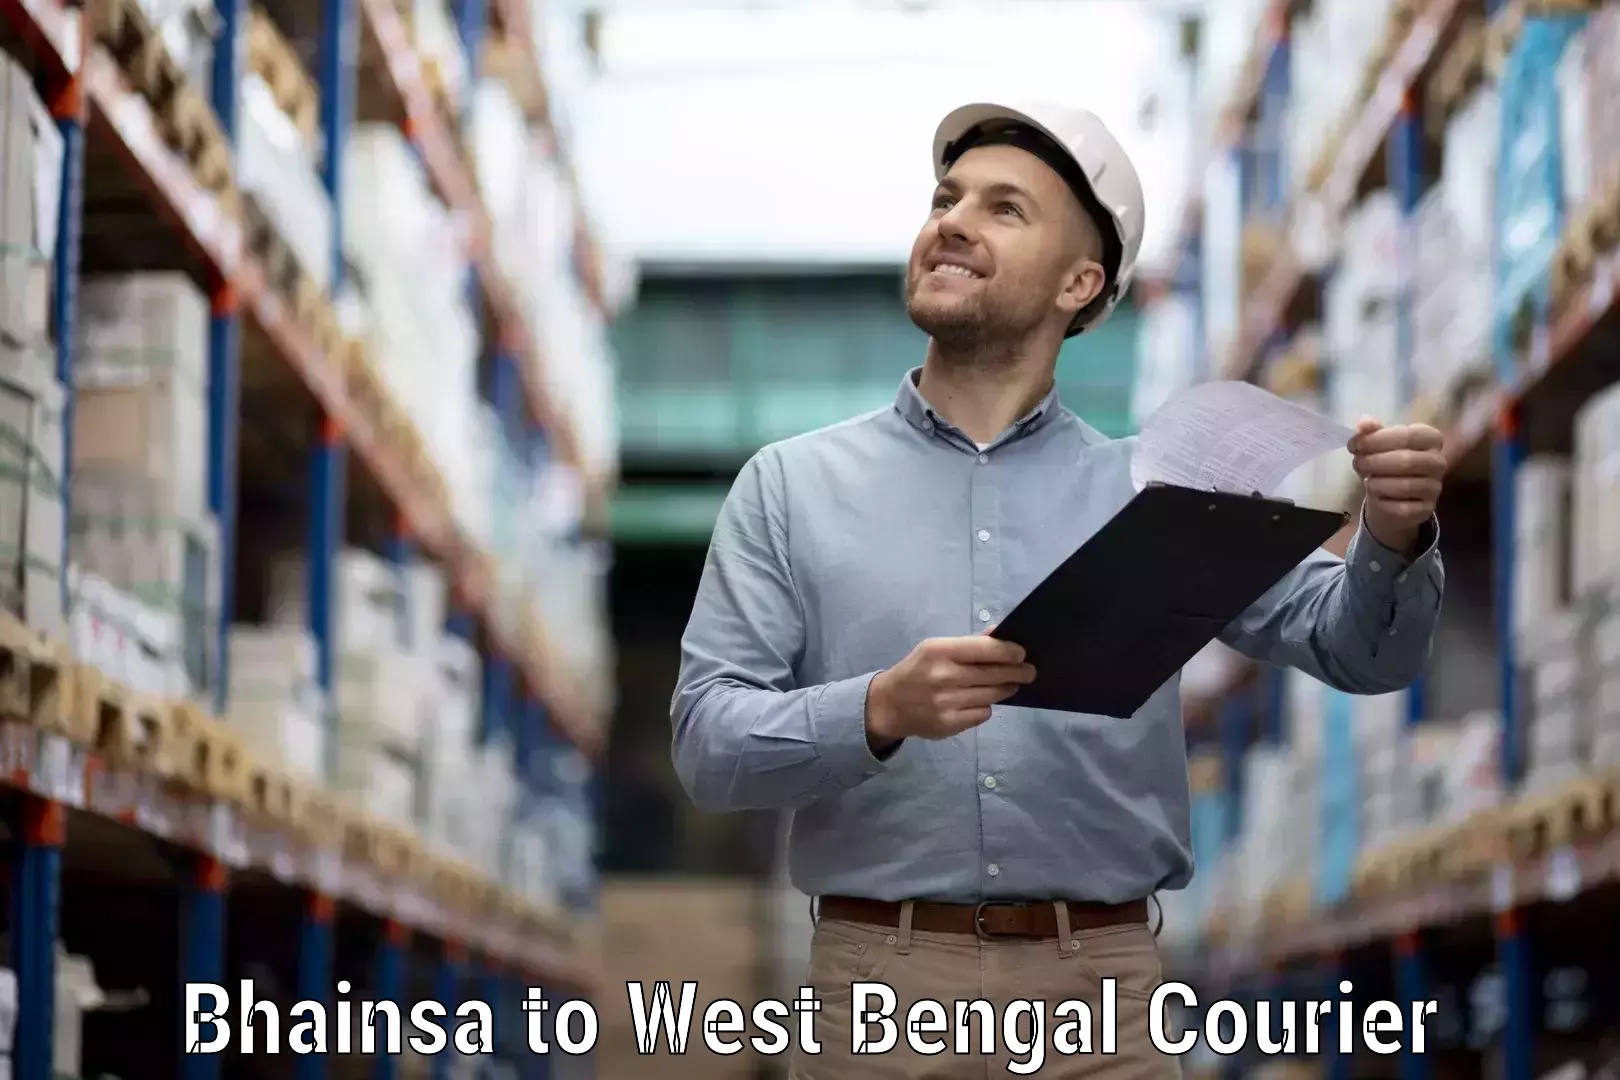 User-friendly delivery service Bhainsa to West Bengal